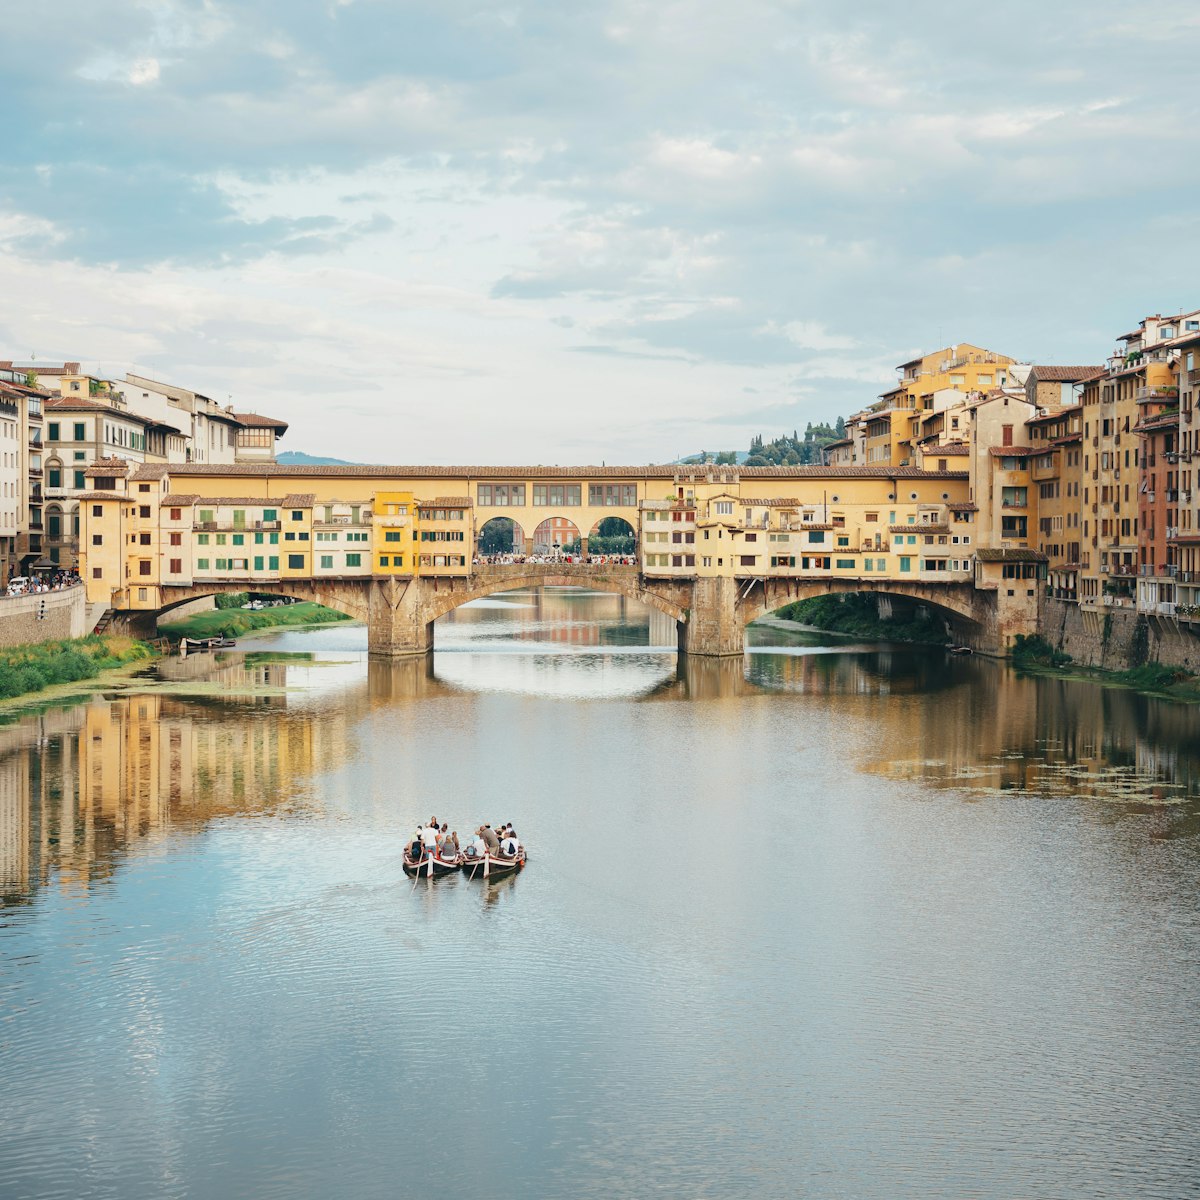 Italy, Florence, River Arno and Ponte Vecchio
591215507
Italy; Incidental People; Water; Water's Edge; Building; City; 2015; Architecture; Bridge - Built Structure; Built Structure; Mode of Transport; Cityscape; History; Travel Destinations; Bridge; Arno; Florence; Tourism; Tuscany; Nautical Vessel; Florence - Italy; Horizontal; Embankment; Ponte Vecchio; International Landmark; River; Day; Riverside; Photography; Cloud - Sky; Sky; Famous Place; Travel; Outdoors; Color Image; City Break;